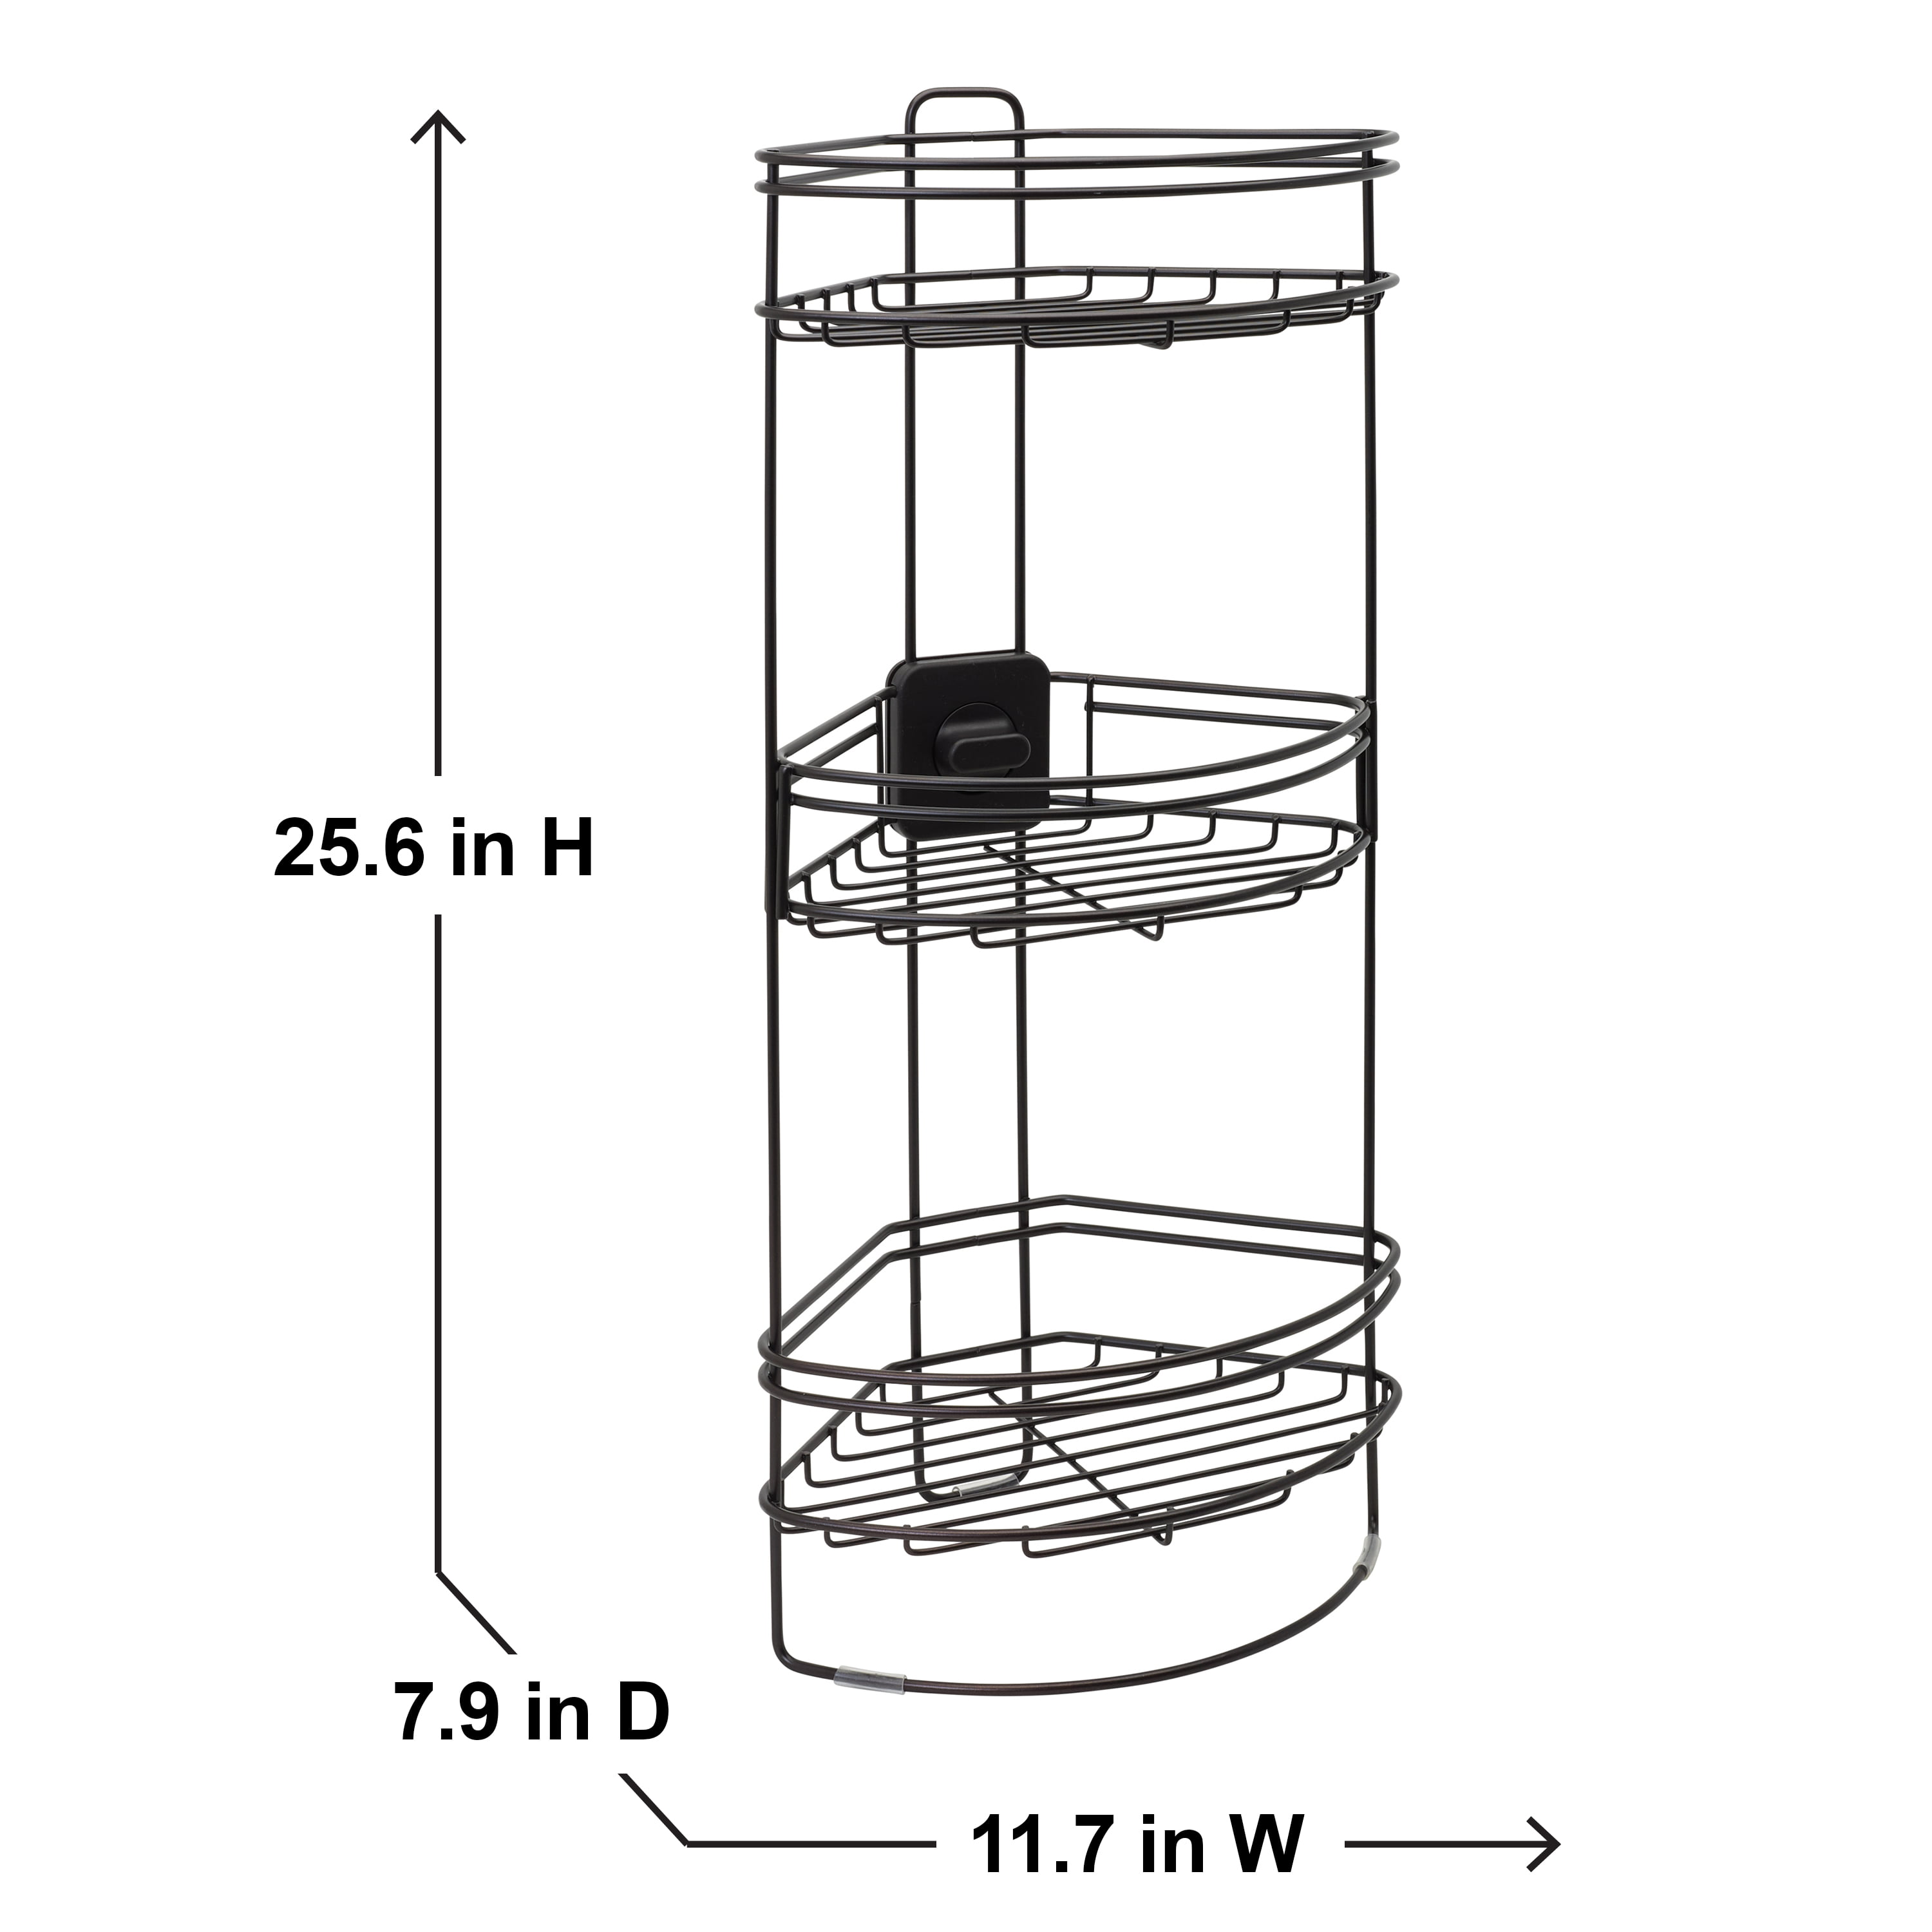 Better Homes & Gardens Rust Proof Aluminum Shower Caddy with Bamboo Shelves, Satin Chrome, Size: Fits Any Standard Showerhead